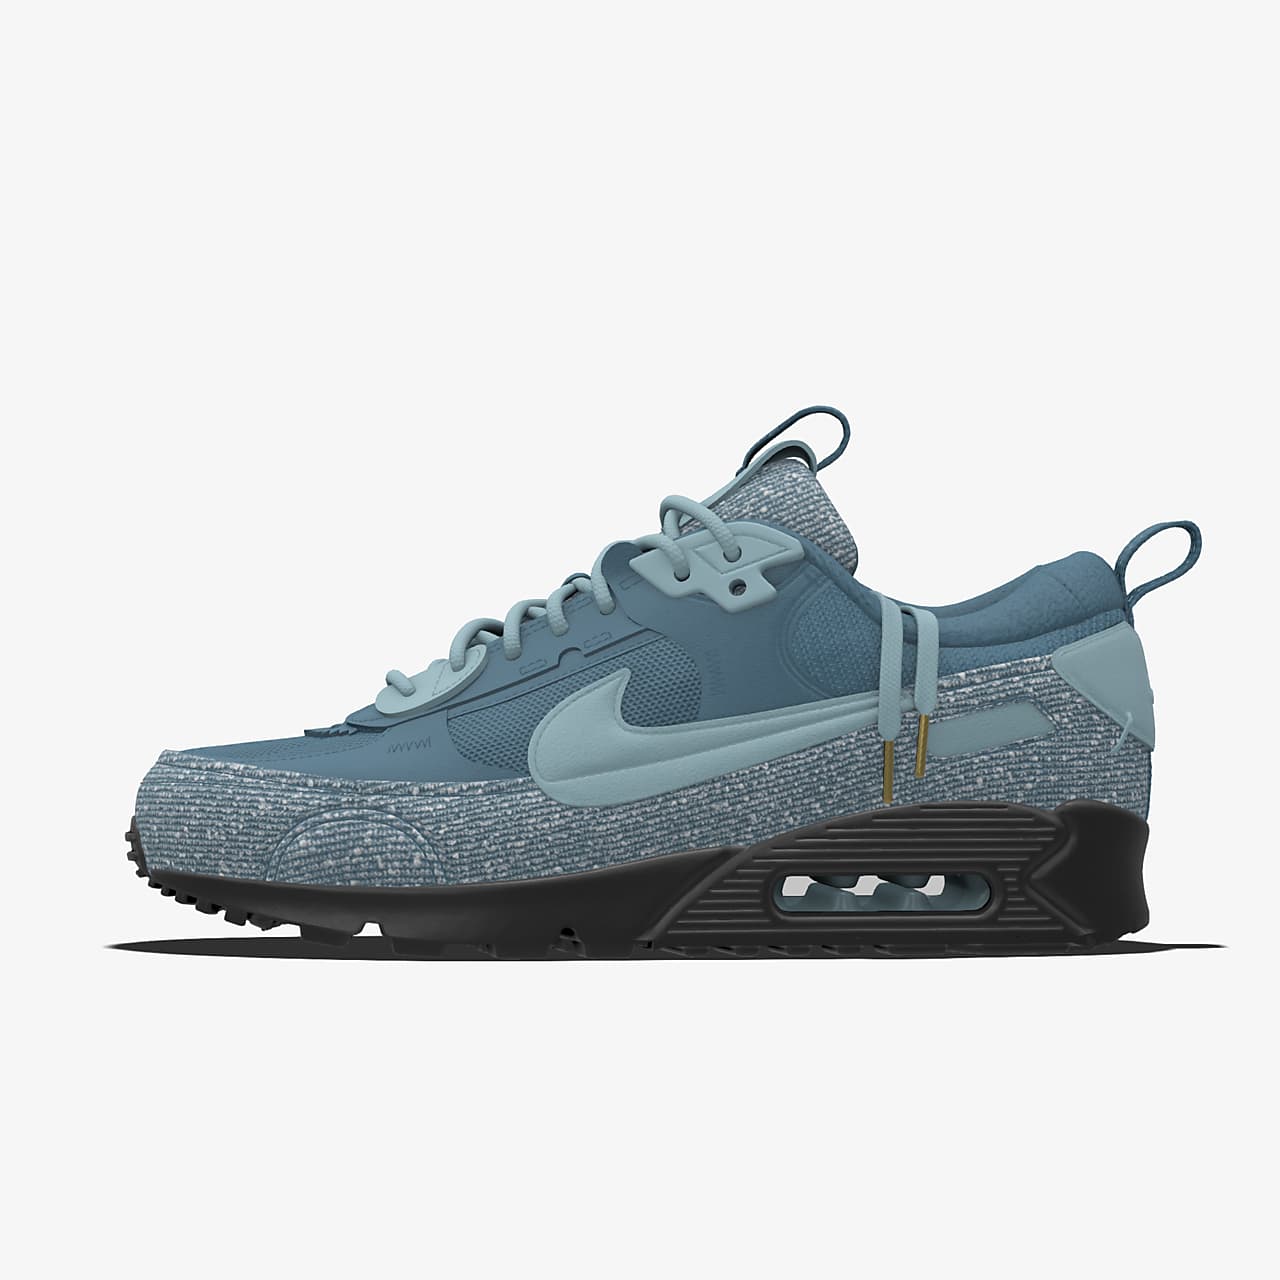 Chaussure personnalisable Nike Air Max 90 Futura Unlocked By You pour femme